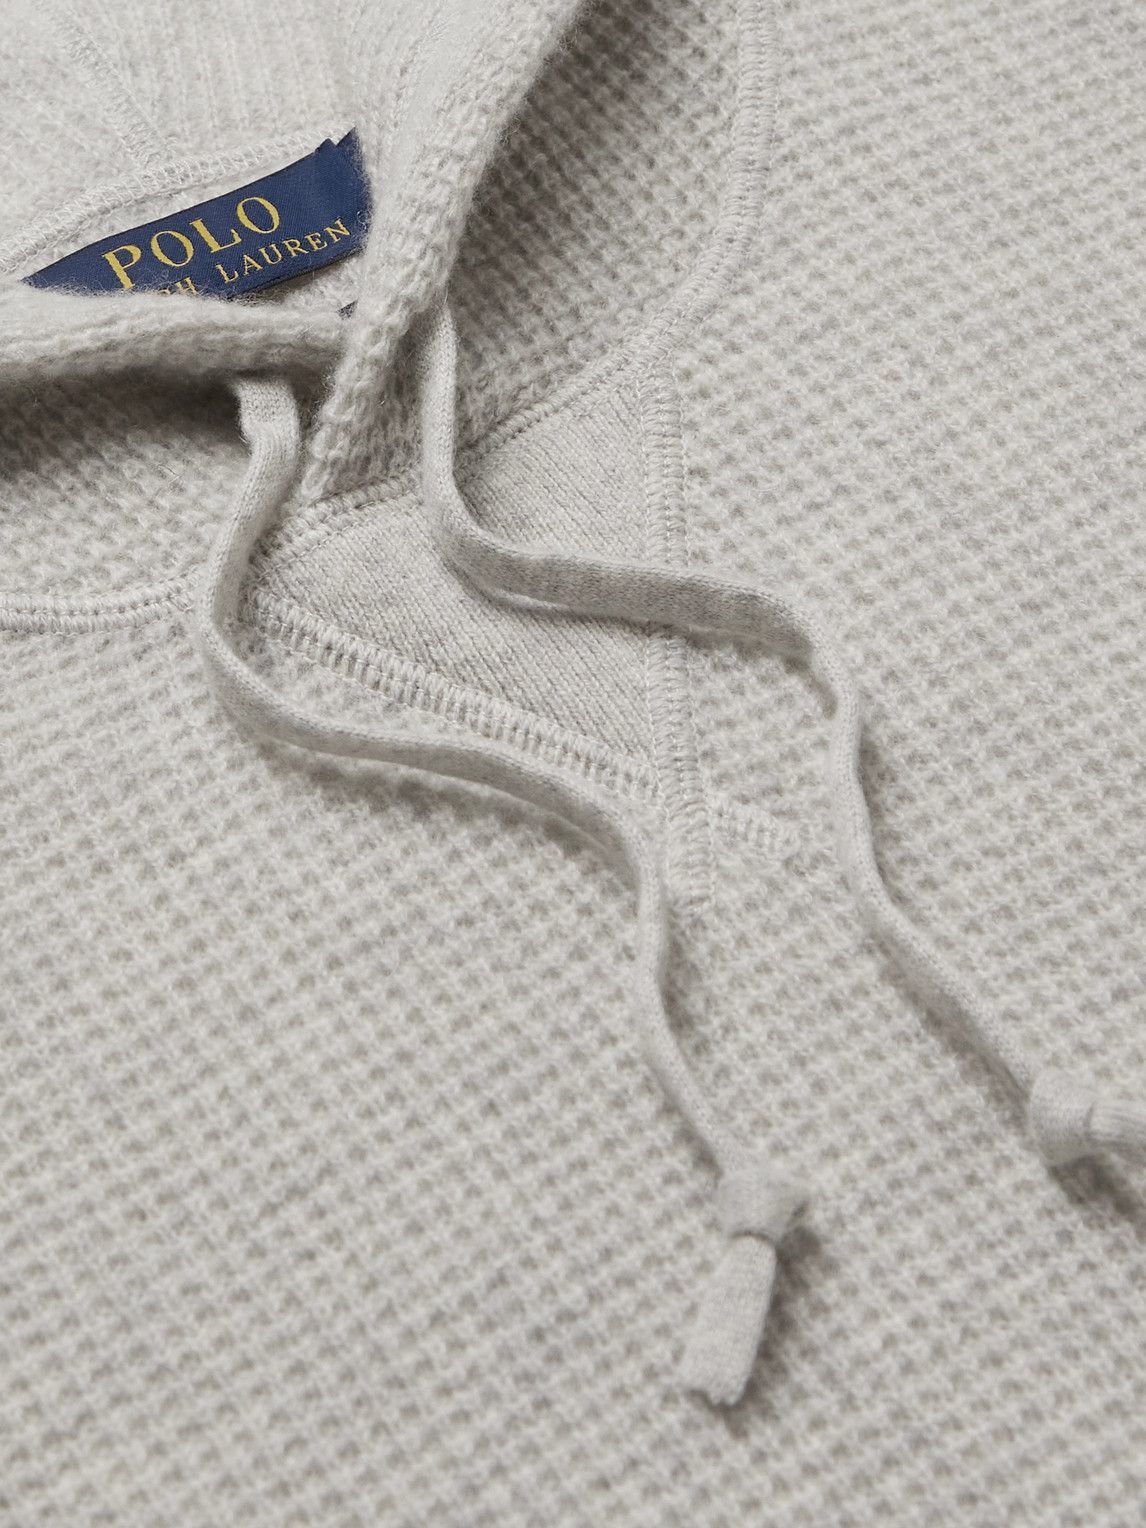 Polo Ralph Lauren - Waffle-Knit Cashmere Hoodie - Gray